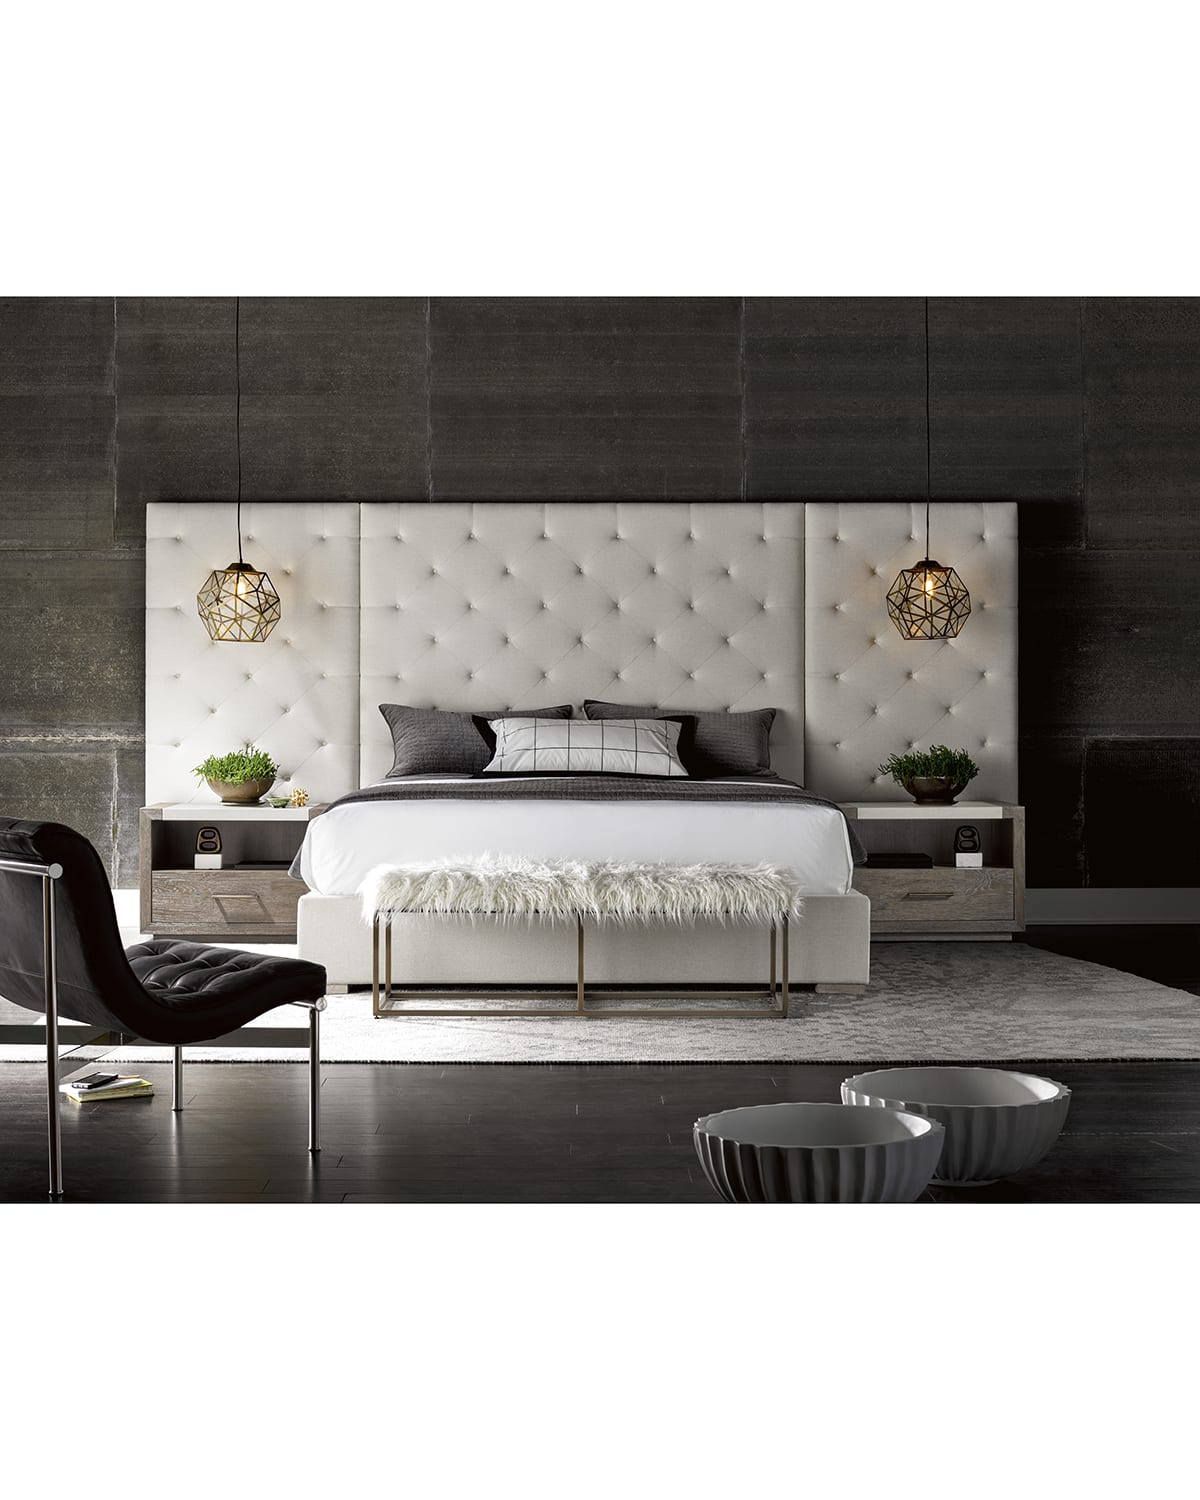 Universal Furniture Parigi Tufted Queen Bed With Panels In Black